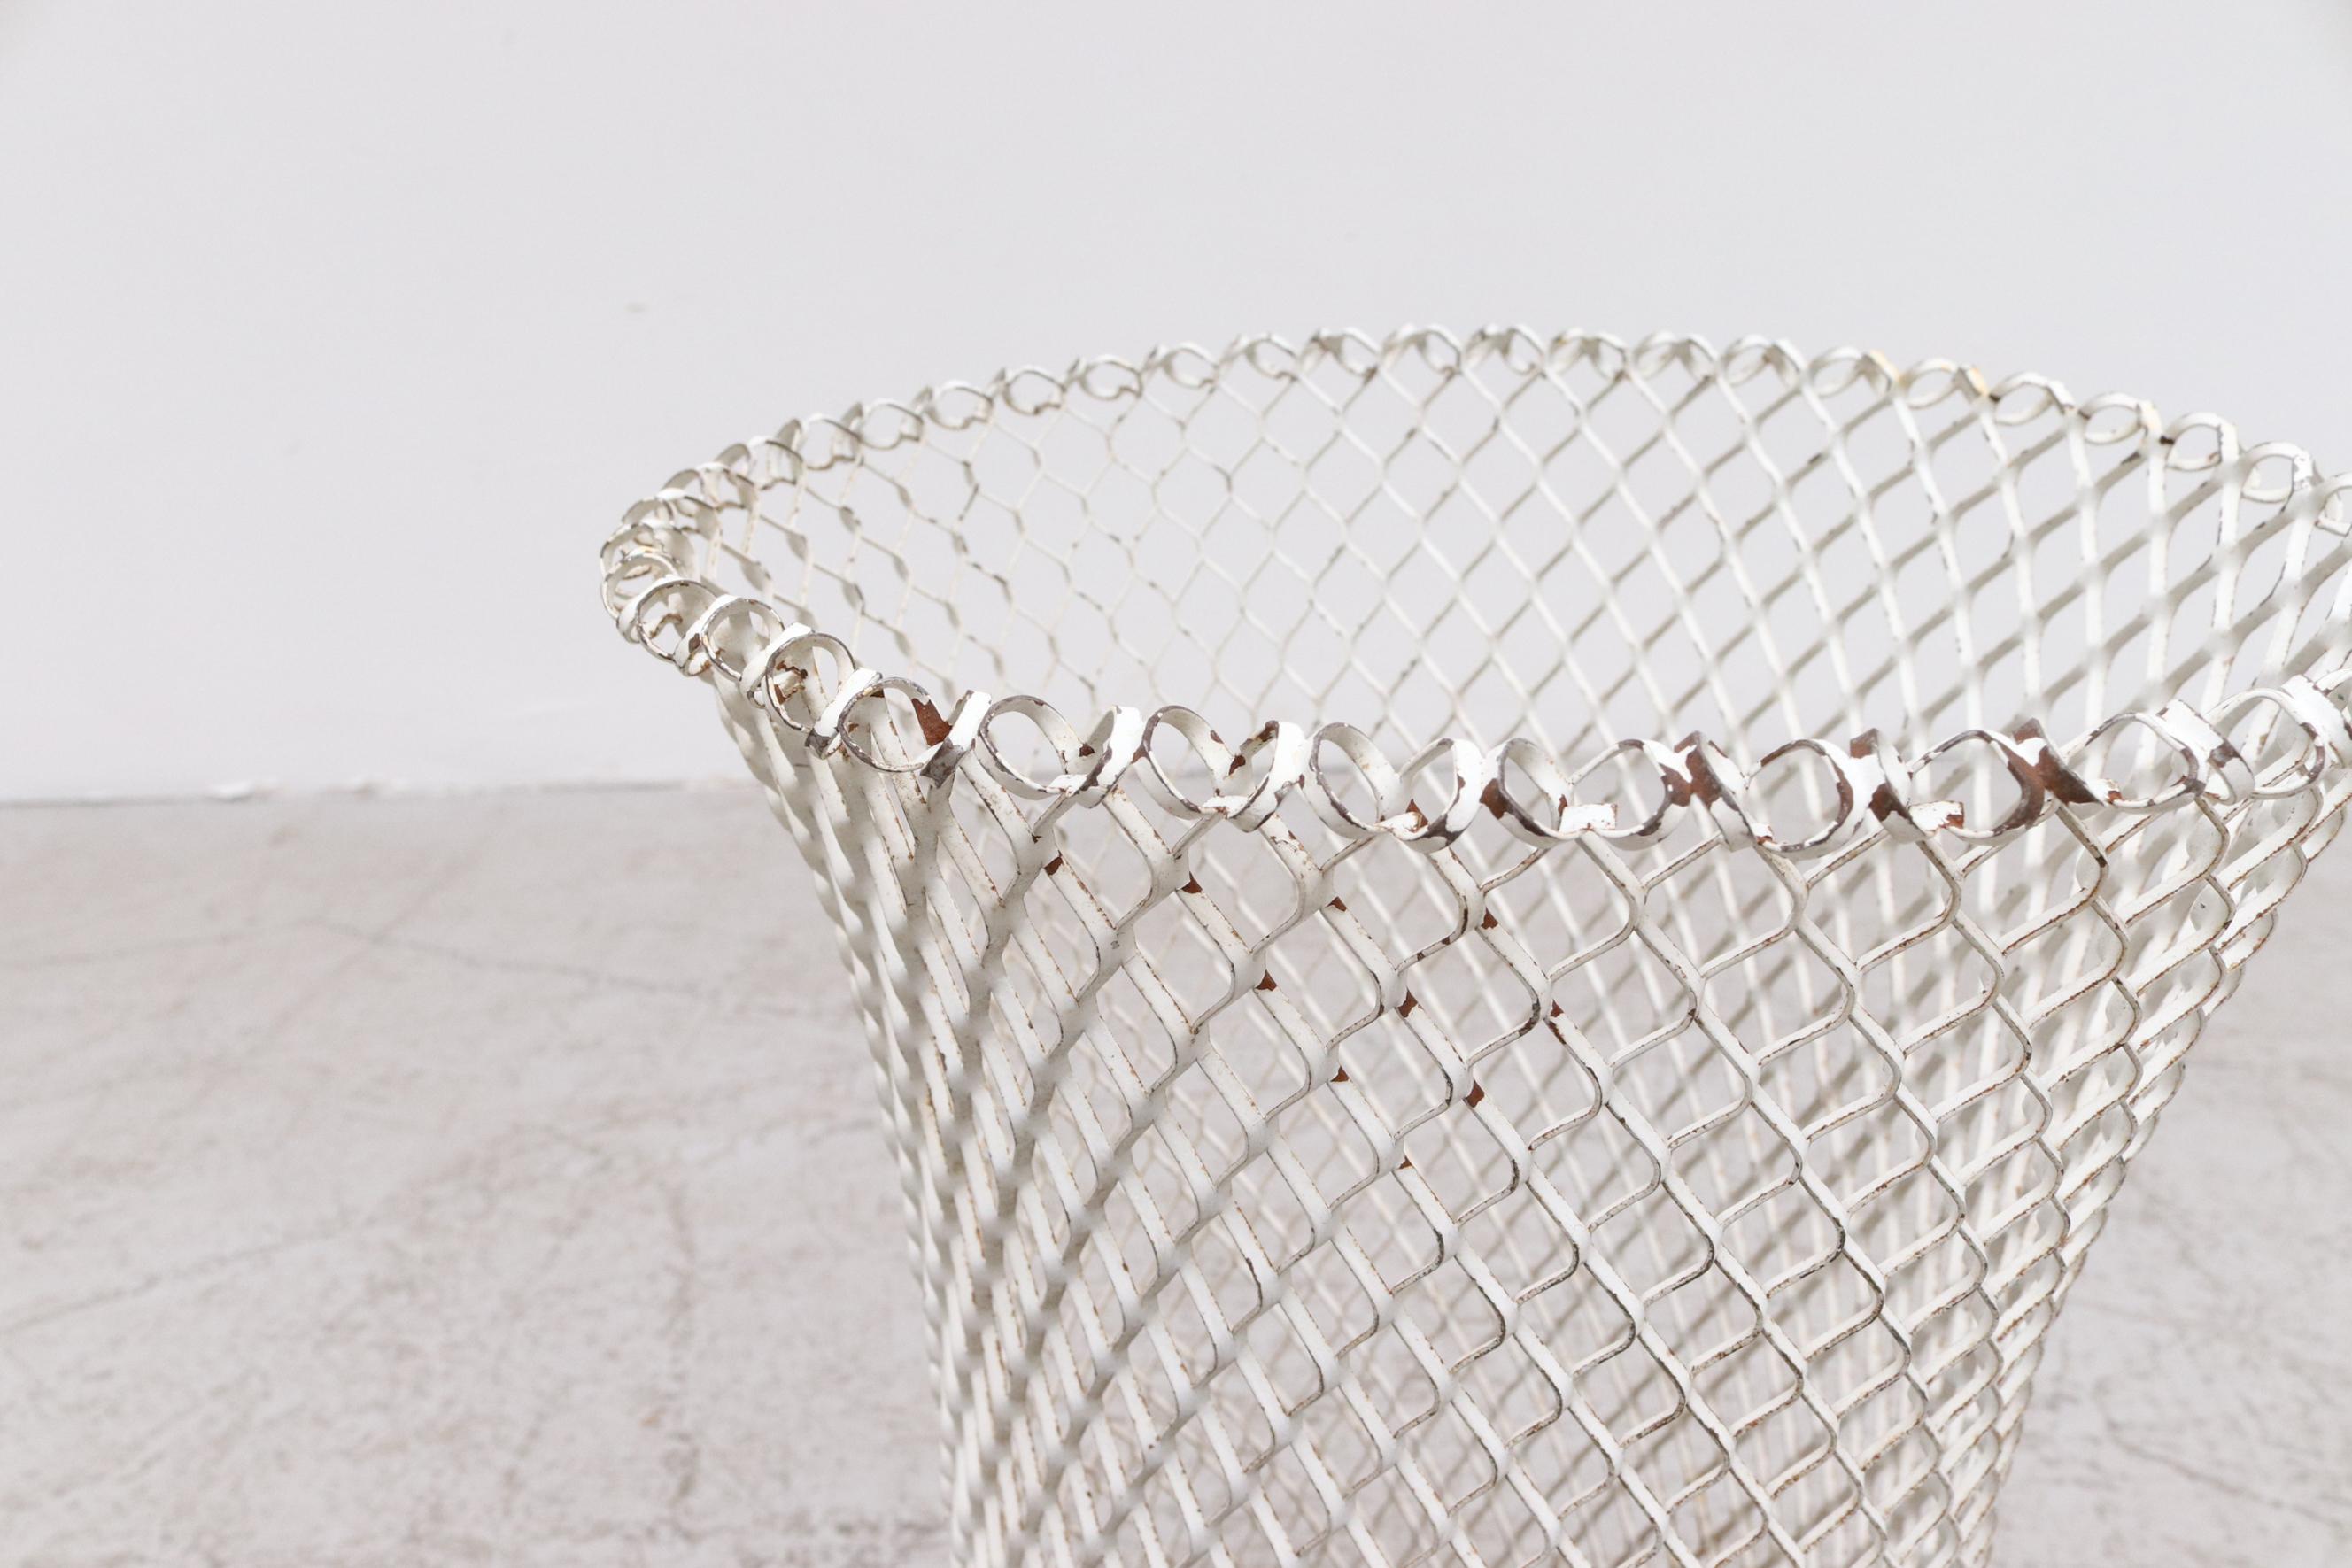 Hand-Woven Mategot Inspired White Woven Wire Waste Bin or Umbrella Holder with Brass Base